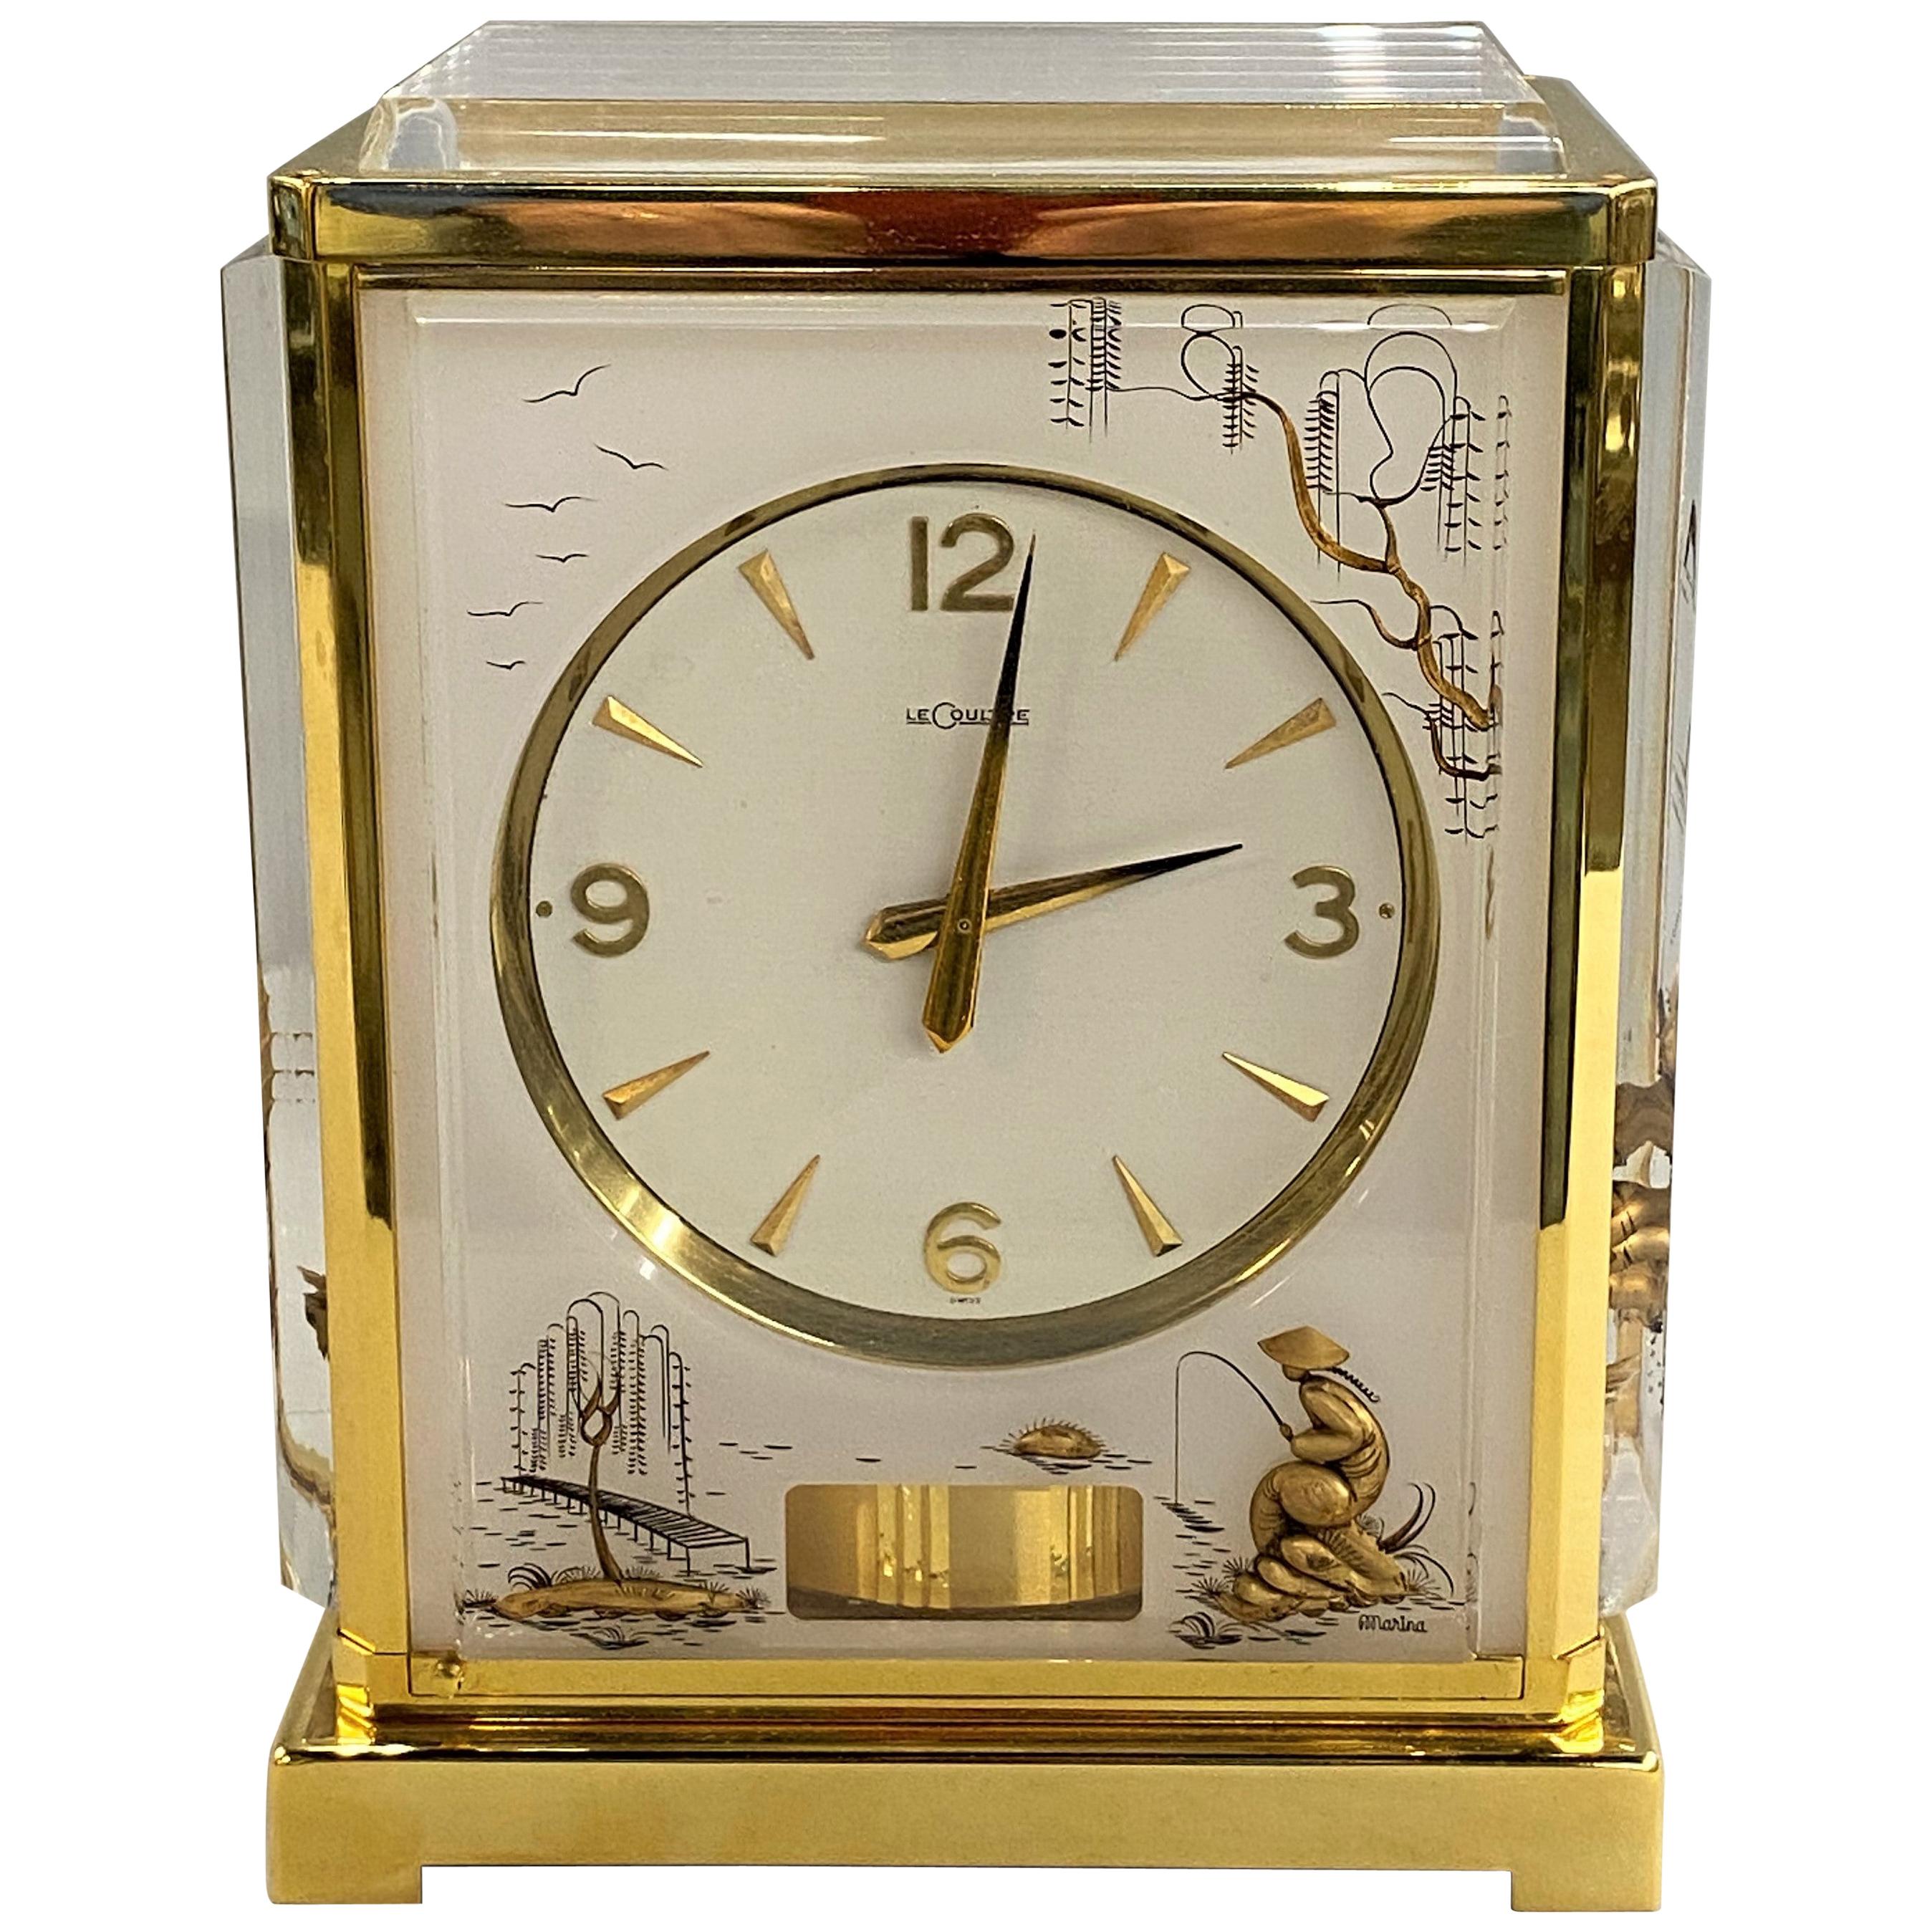 Rare Lecoultre White Marina Atmos Clock with Asian Style Panels